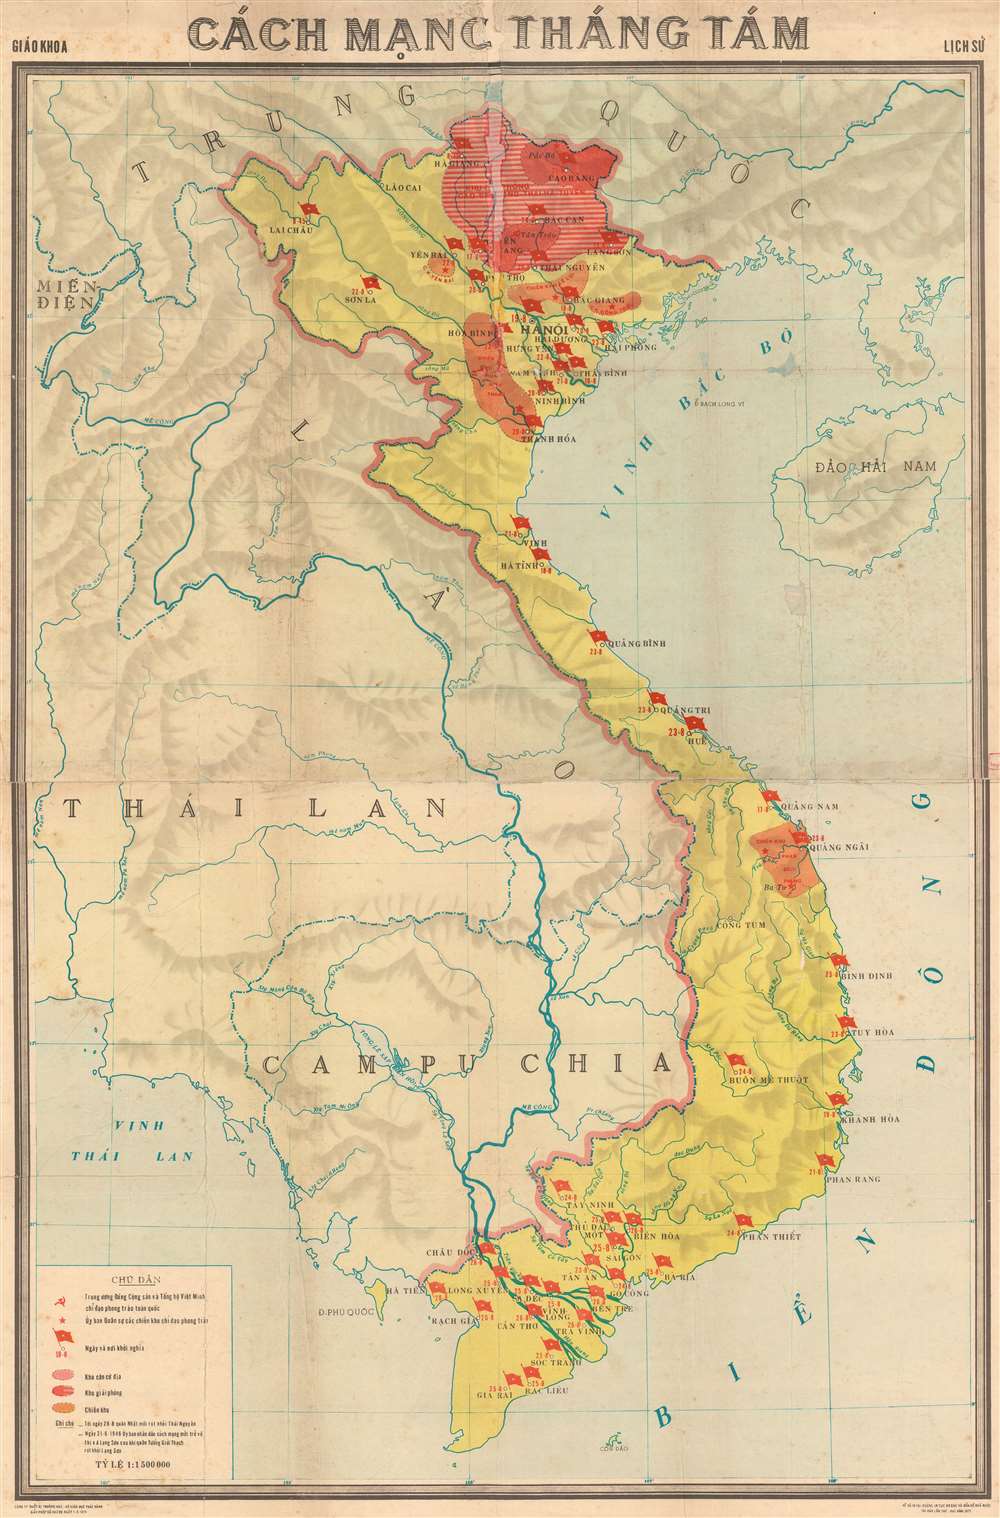 1975 Vietnamese Ministry of Education Wall Map of Vietnam during the August Revolution